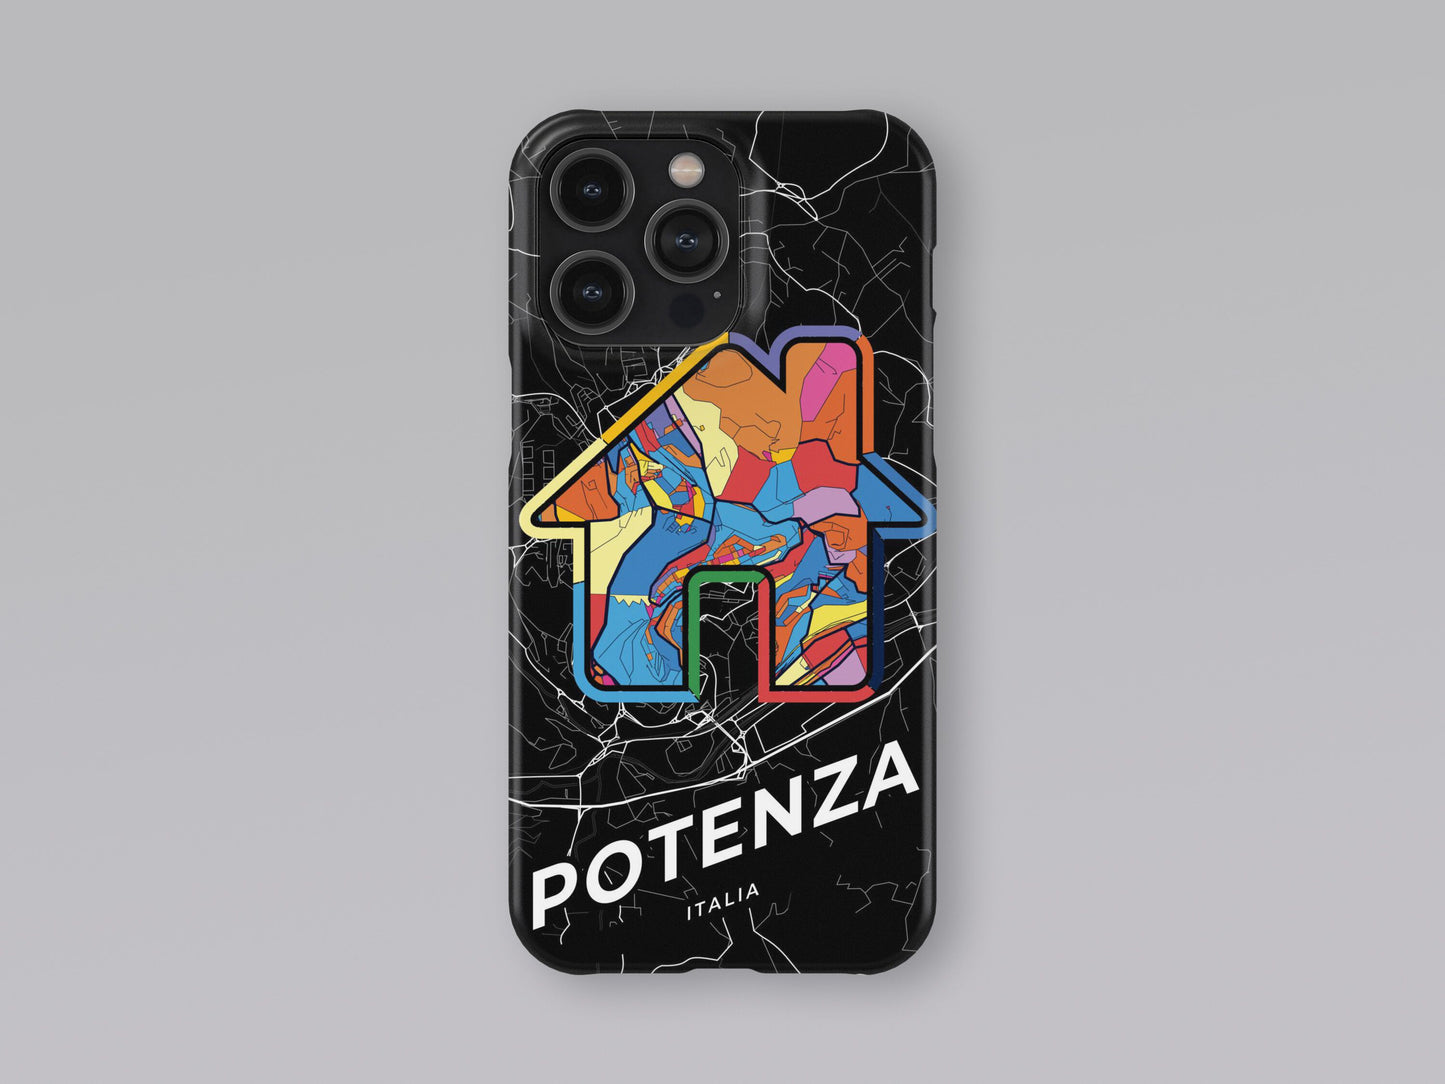 Potenza Italy slim phone case with colorful icon. Birthday, wedding or housewarming gift. Couple match cases. 3